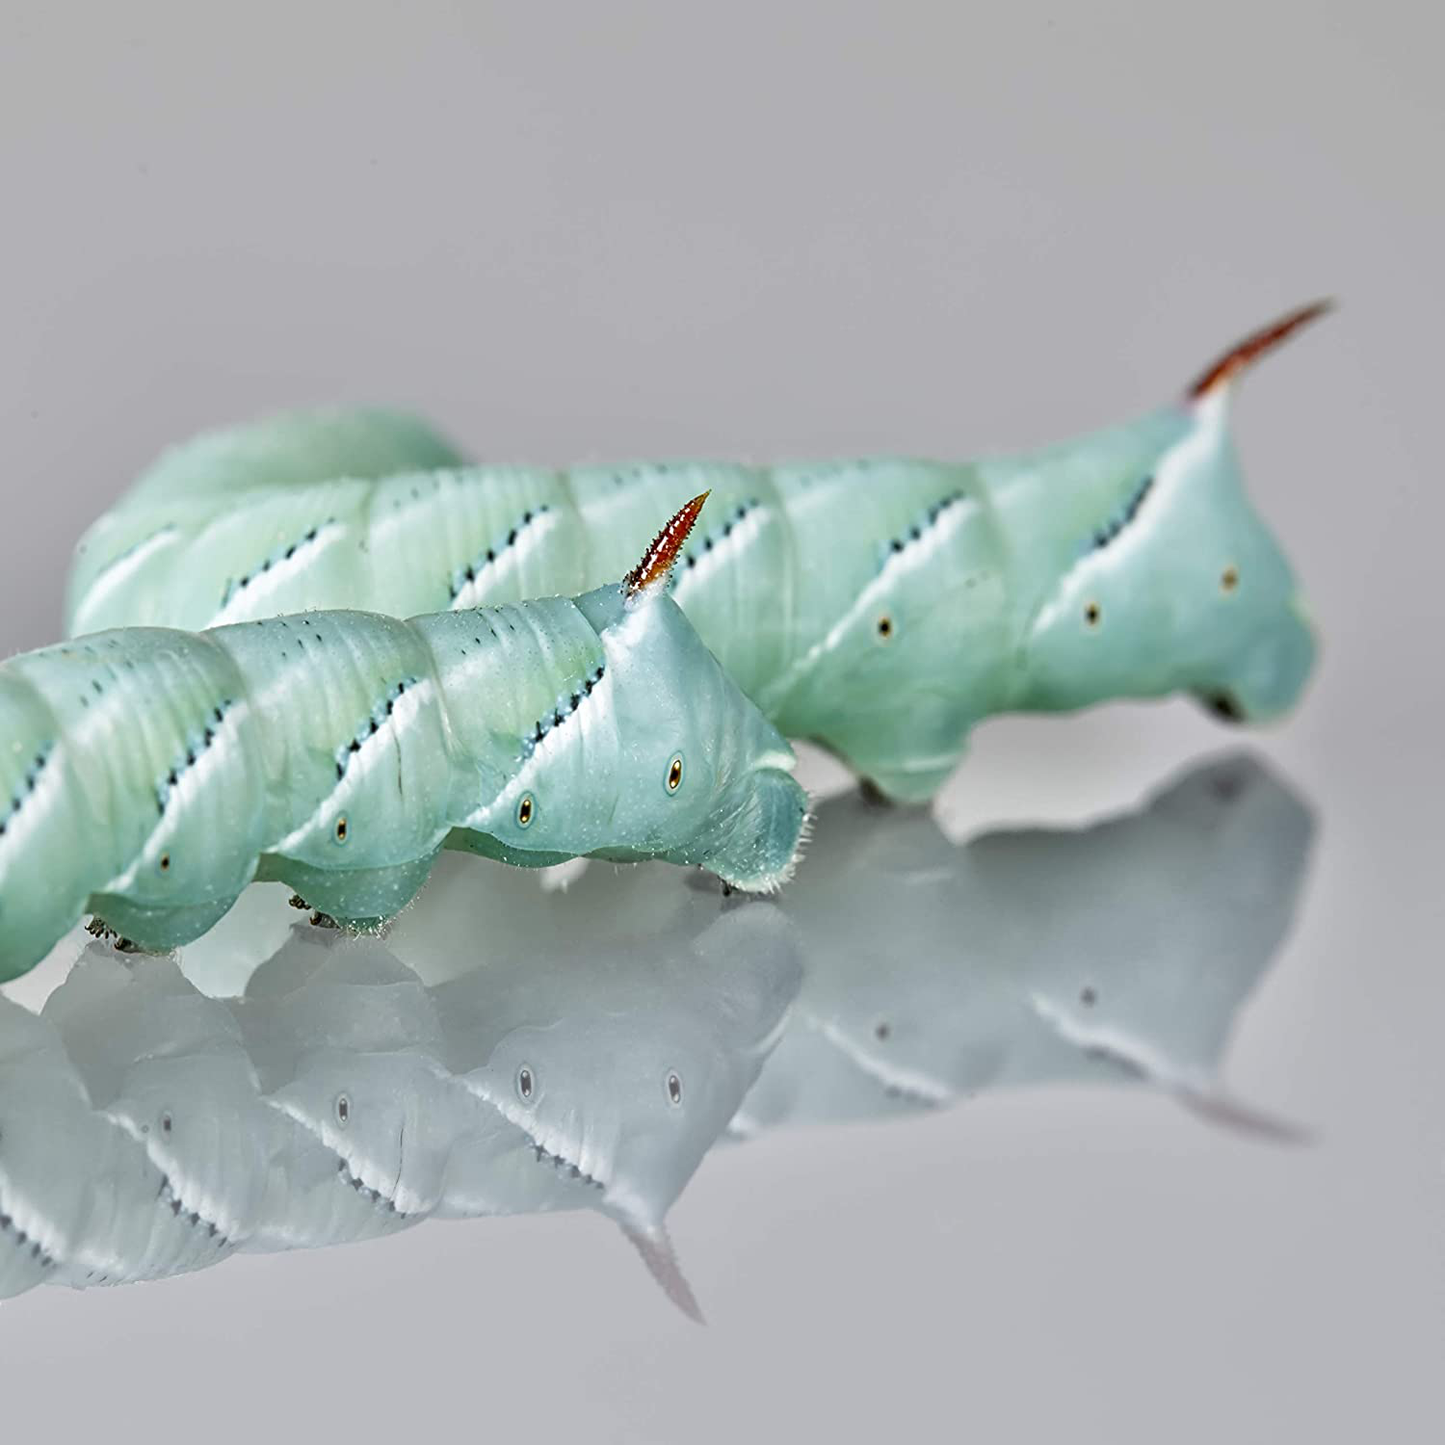 Dbdpet Premium 40-55 Live Hornworms (2 Cups of 20-30Ct) - Food for Bearded Dragons, Leopard Geckos, Frogs, Chameleons, Tegus, and Other Reptiles! Animals & Pet Supplies > Pet Supplies > Reptile & Amphibian Supplies > Reptile & Amphibian Substrates DBDPet   